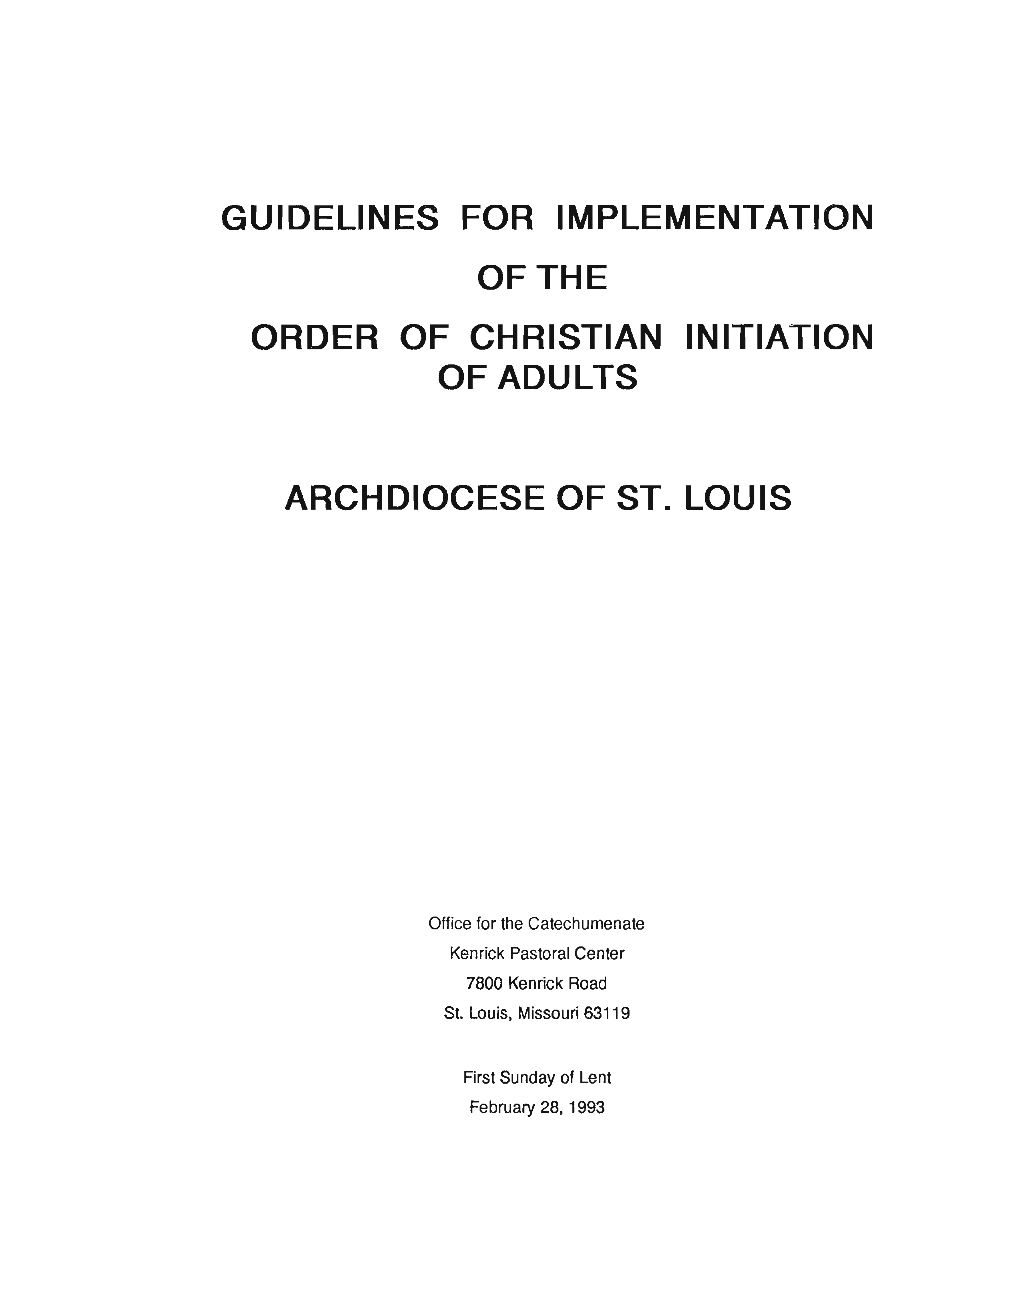 Guidelines for Implementation Ofthe Order of Christian Initiation of Adults